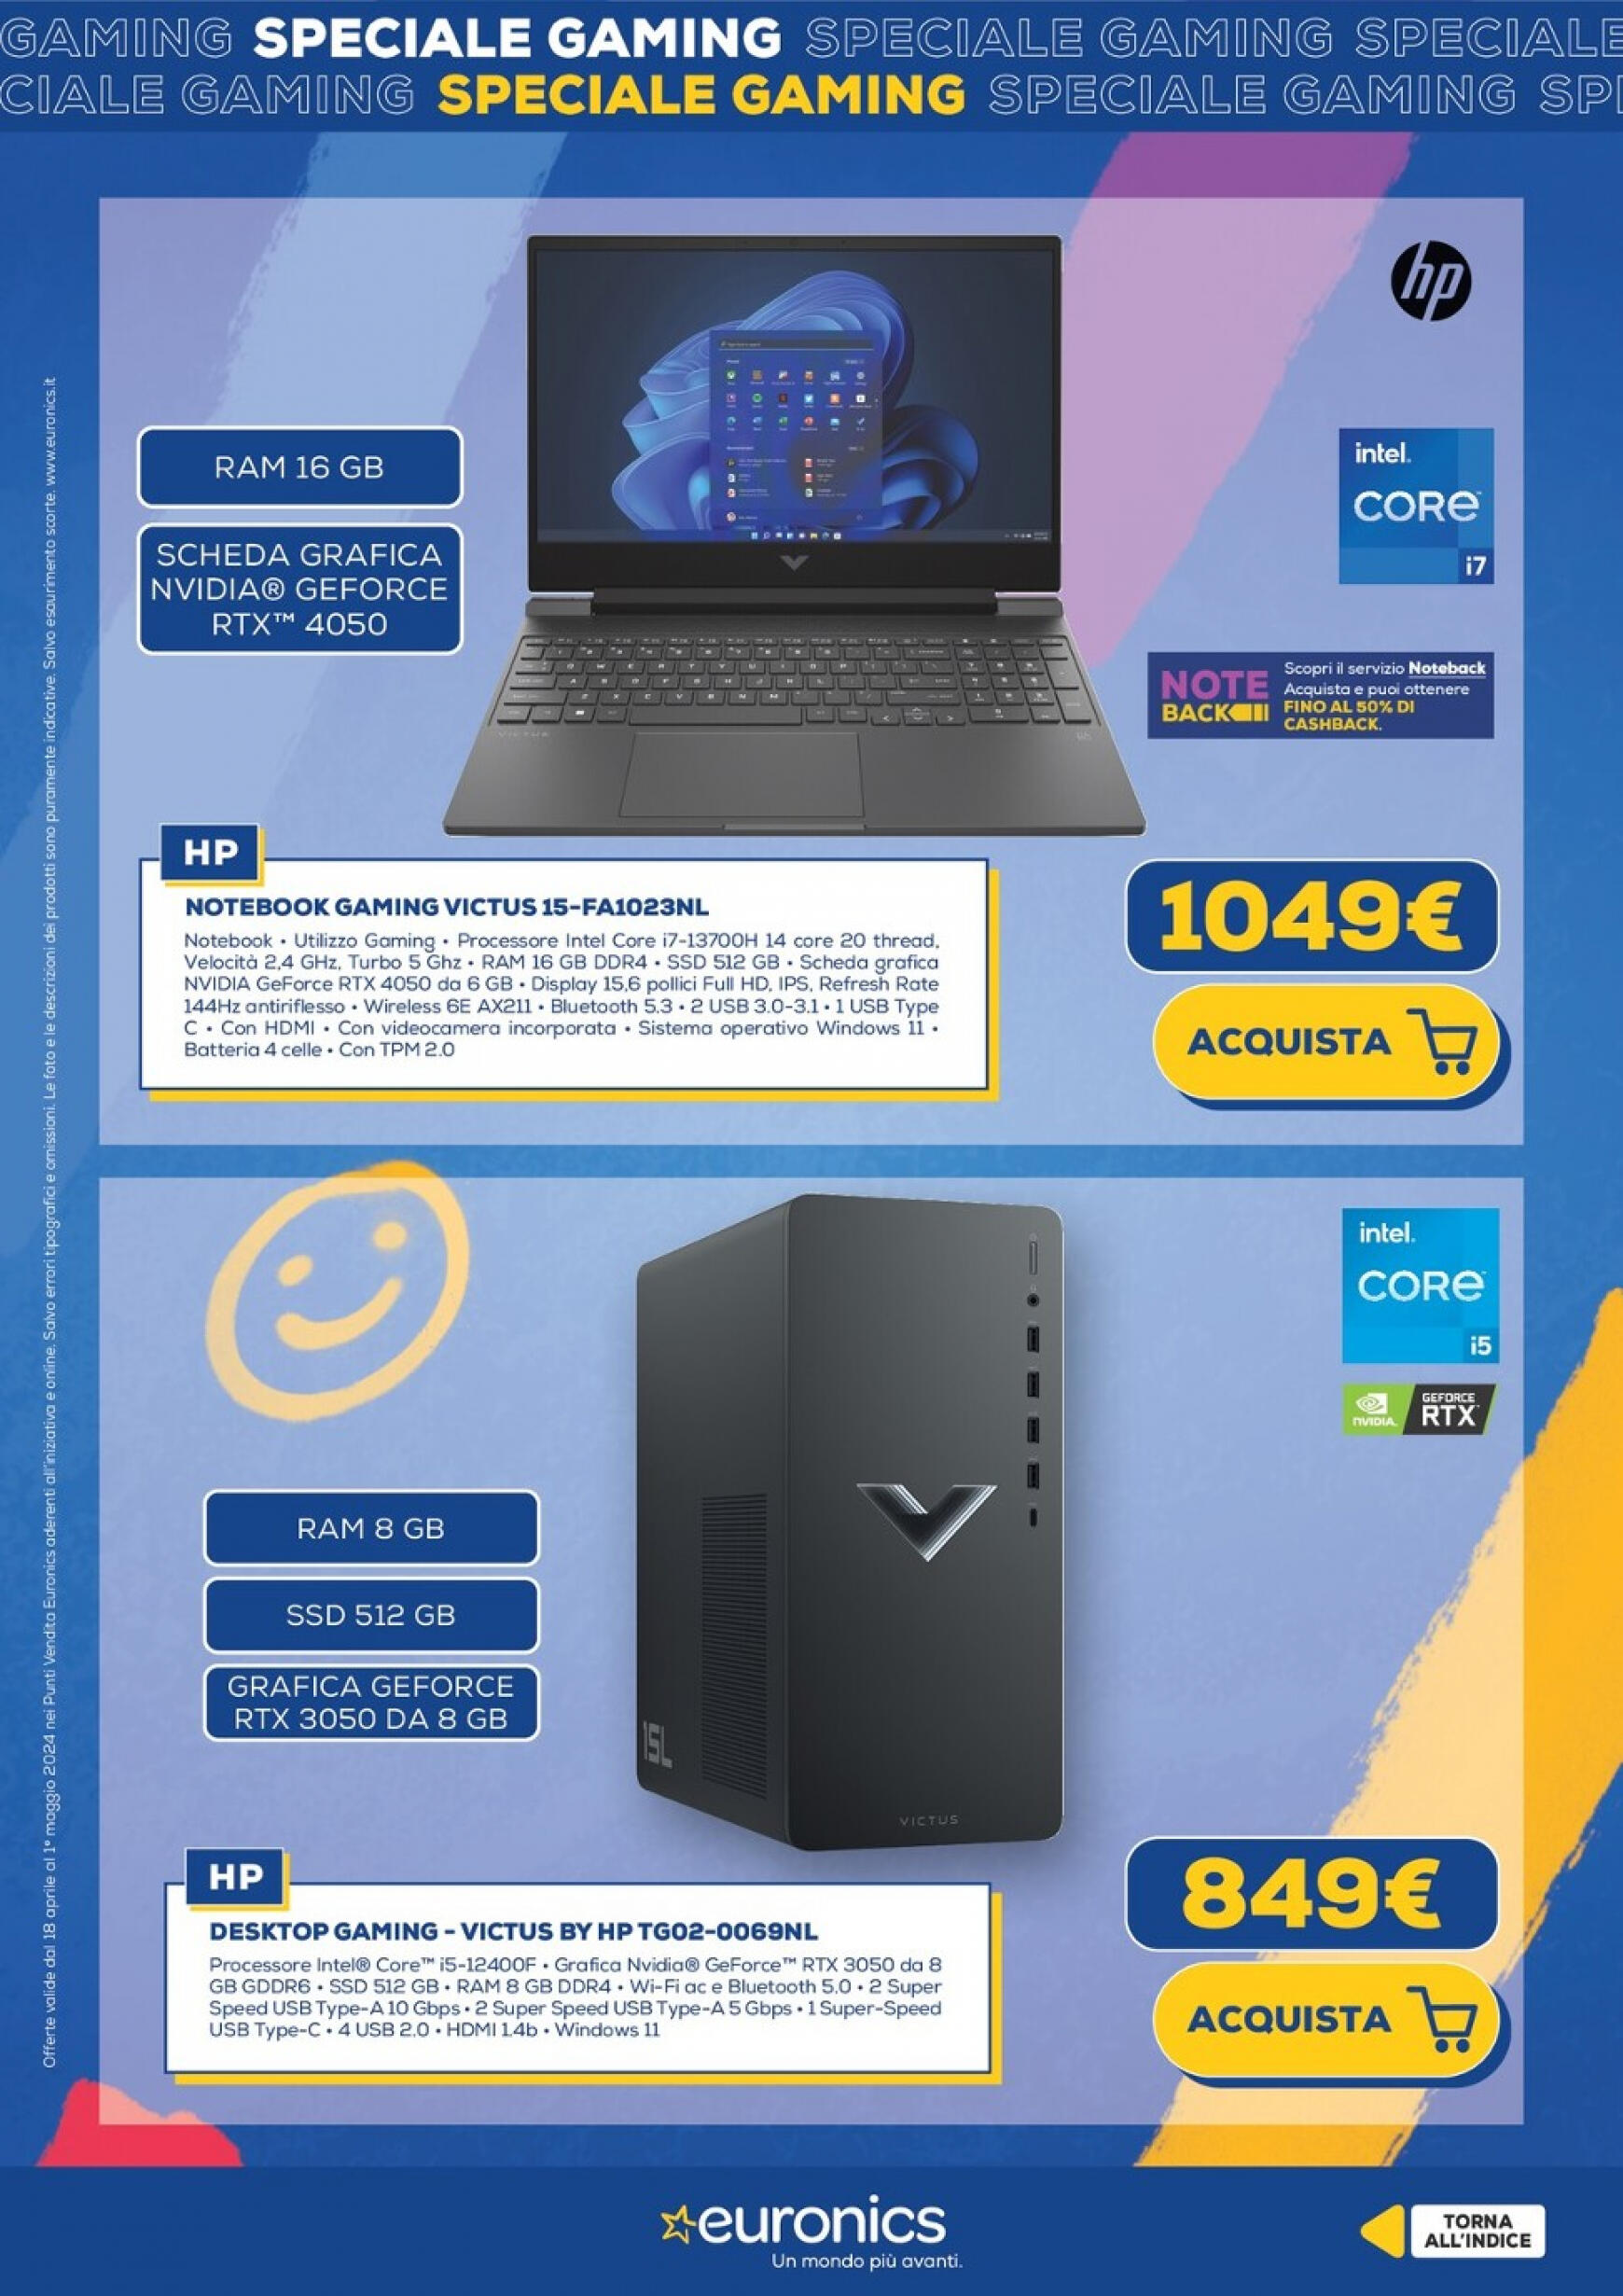 euronics - Nuovo volantino Euronics - Speciale Gaming 18.04. - 01.05. - page: 9